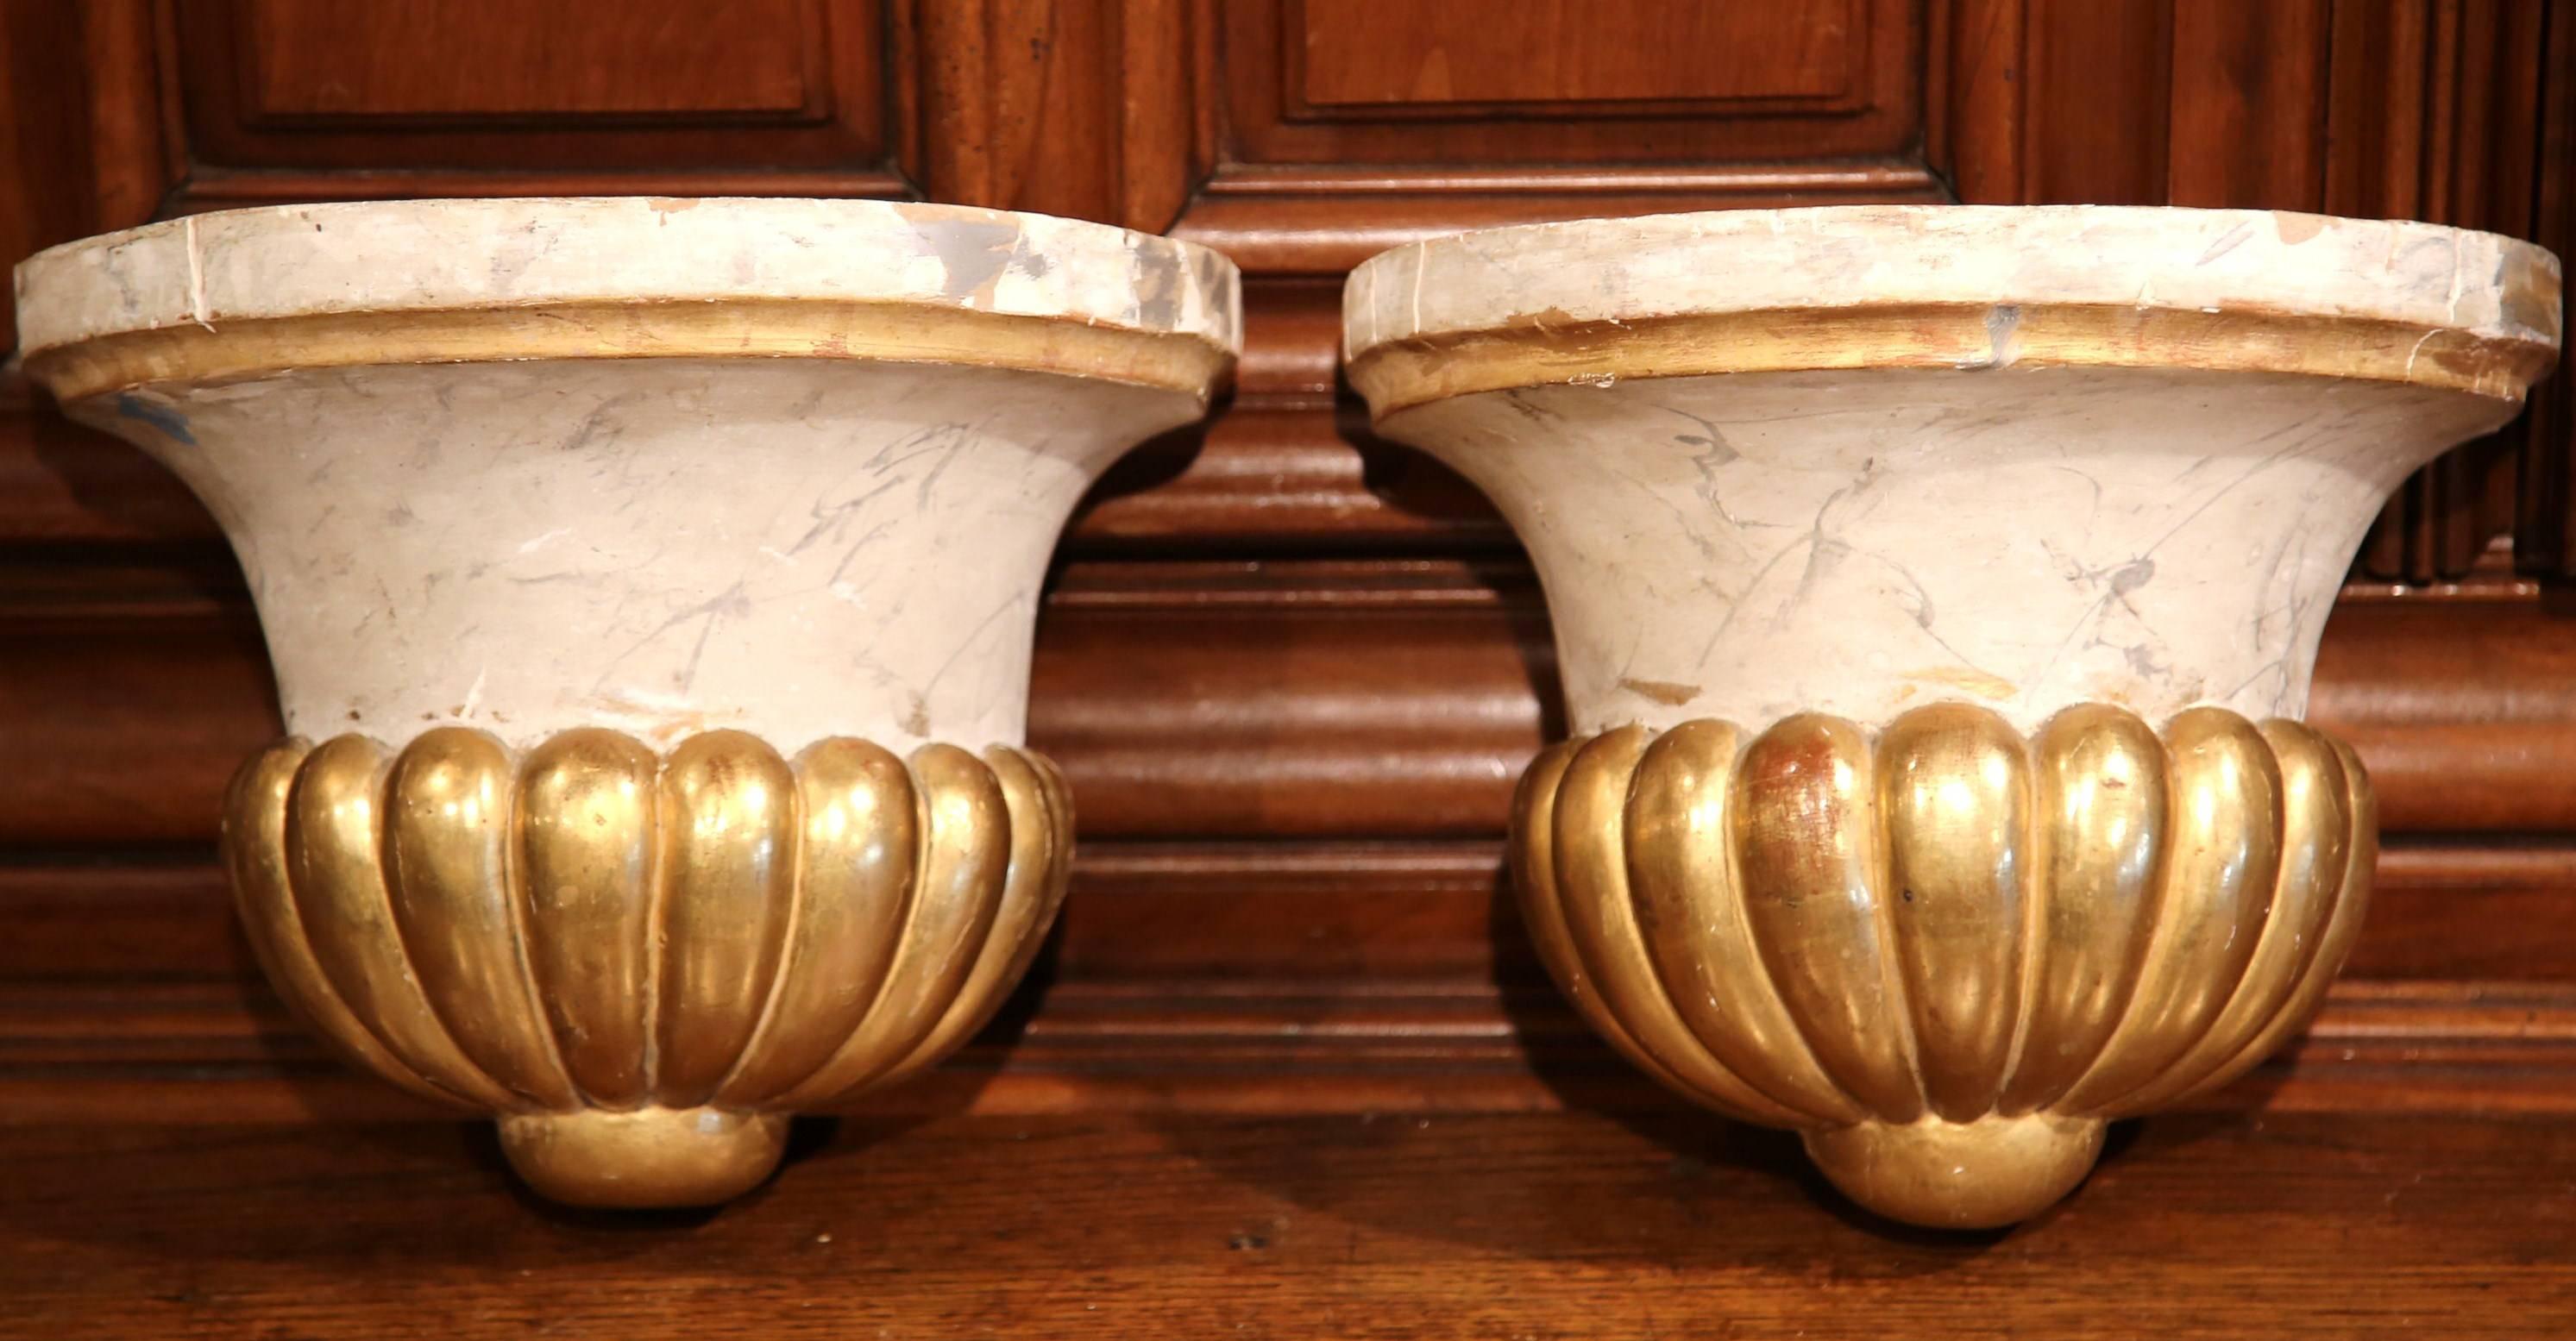 This beautiful pair of antique wall hanging brackets were crafted in France circa 1830. Each of the hand carved corbels features a cream faux marble finish with gold leaf embellishment on the bottom. The pots have a large mouth and a scalloped